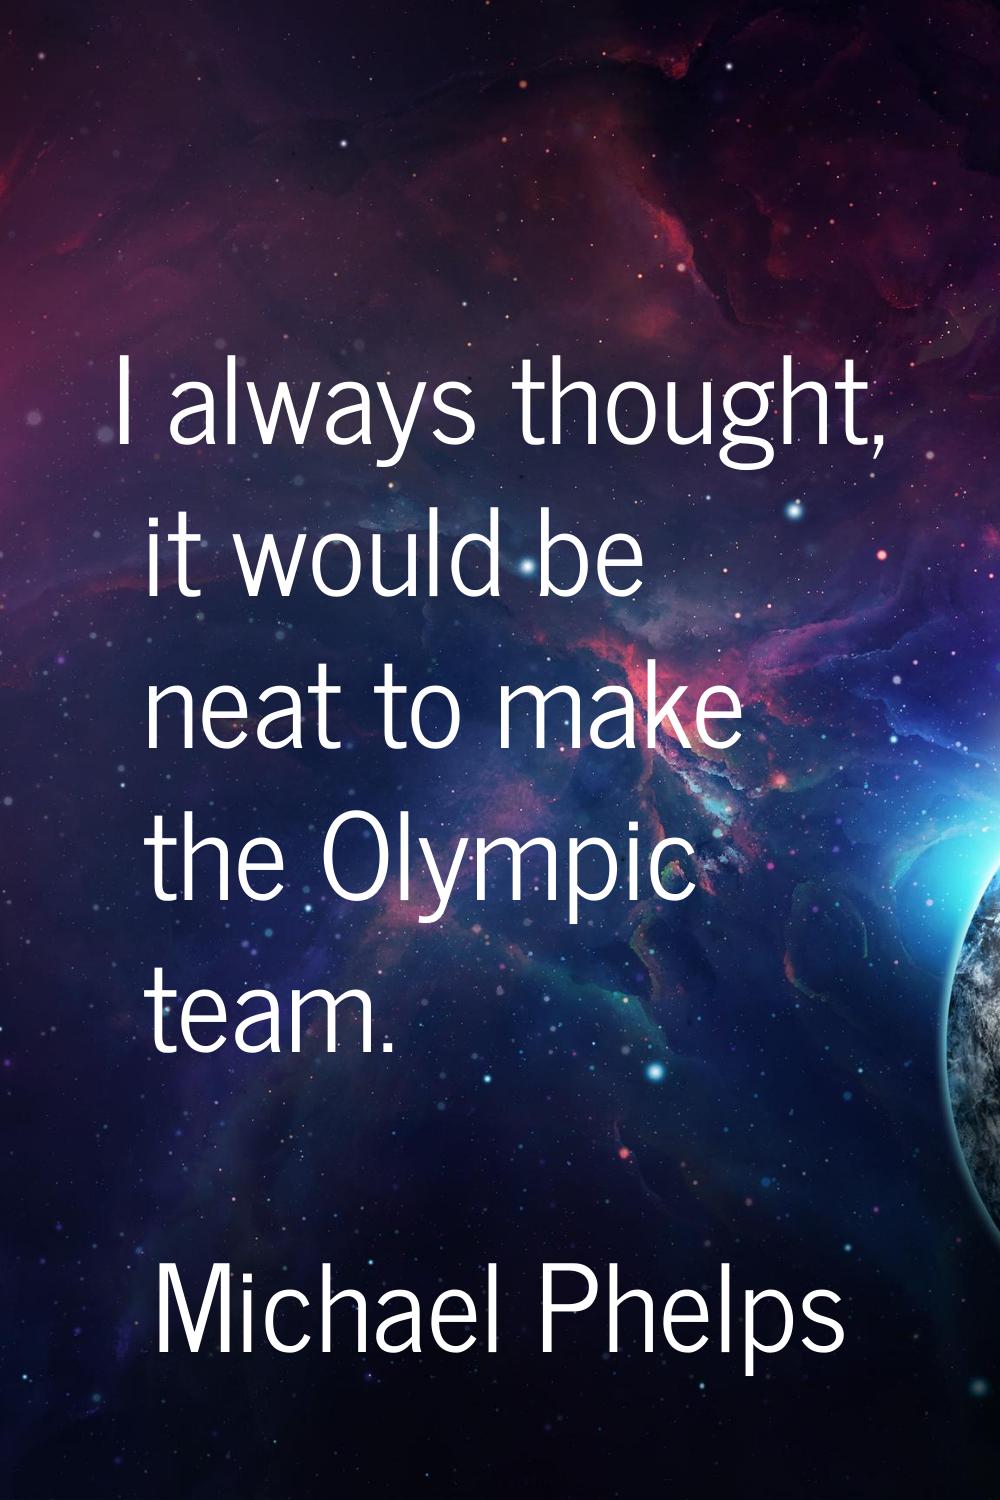 I always thought, it would be neat to make the Olympic team.